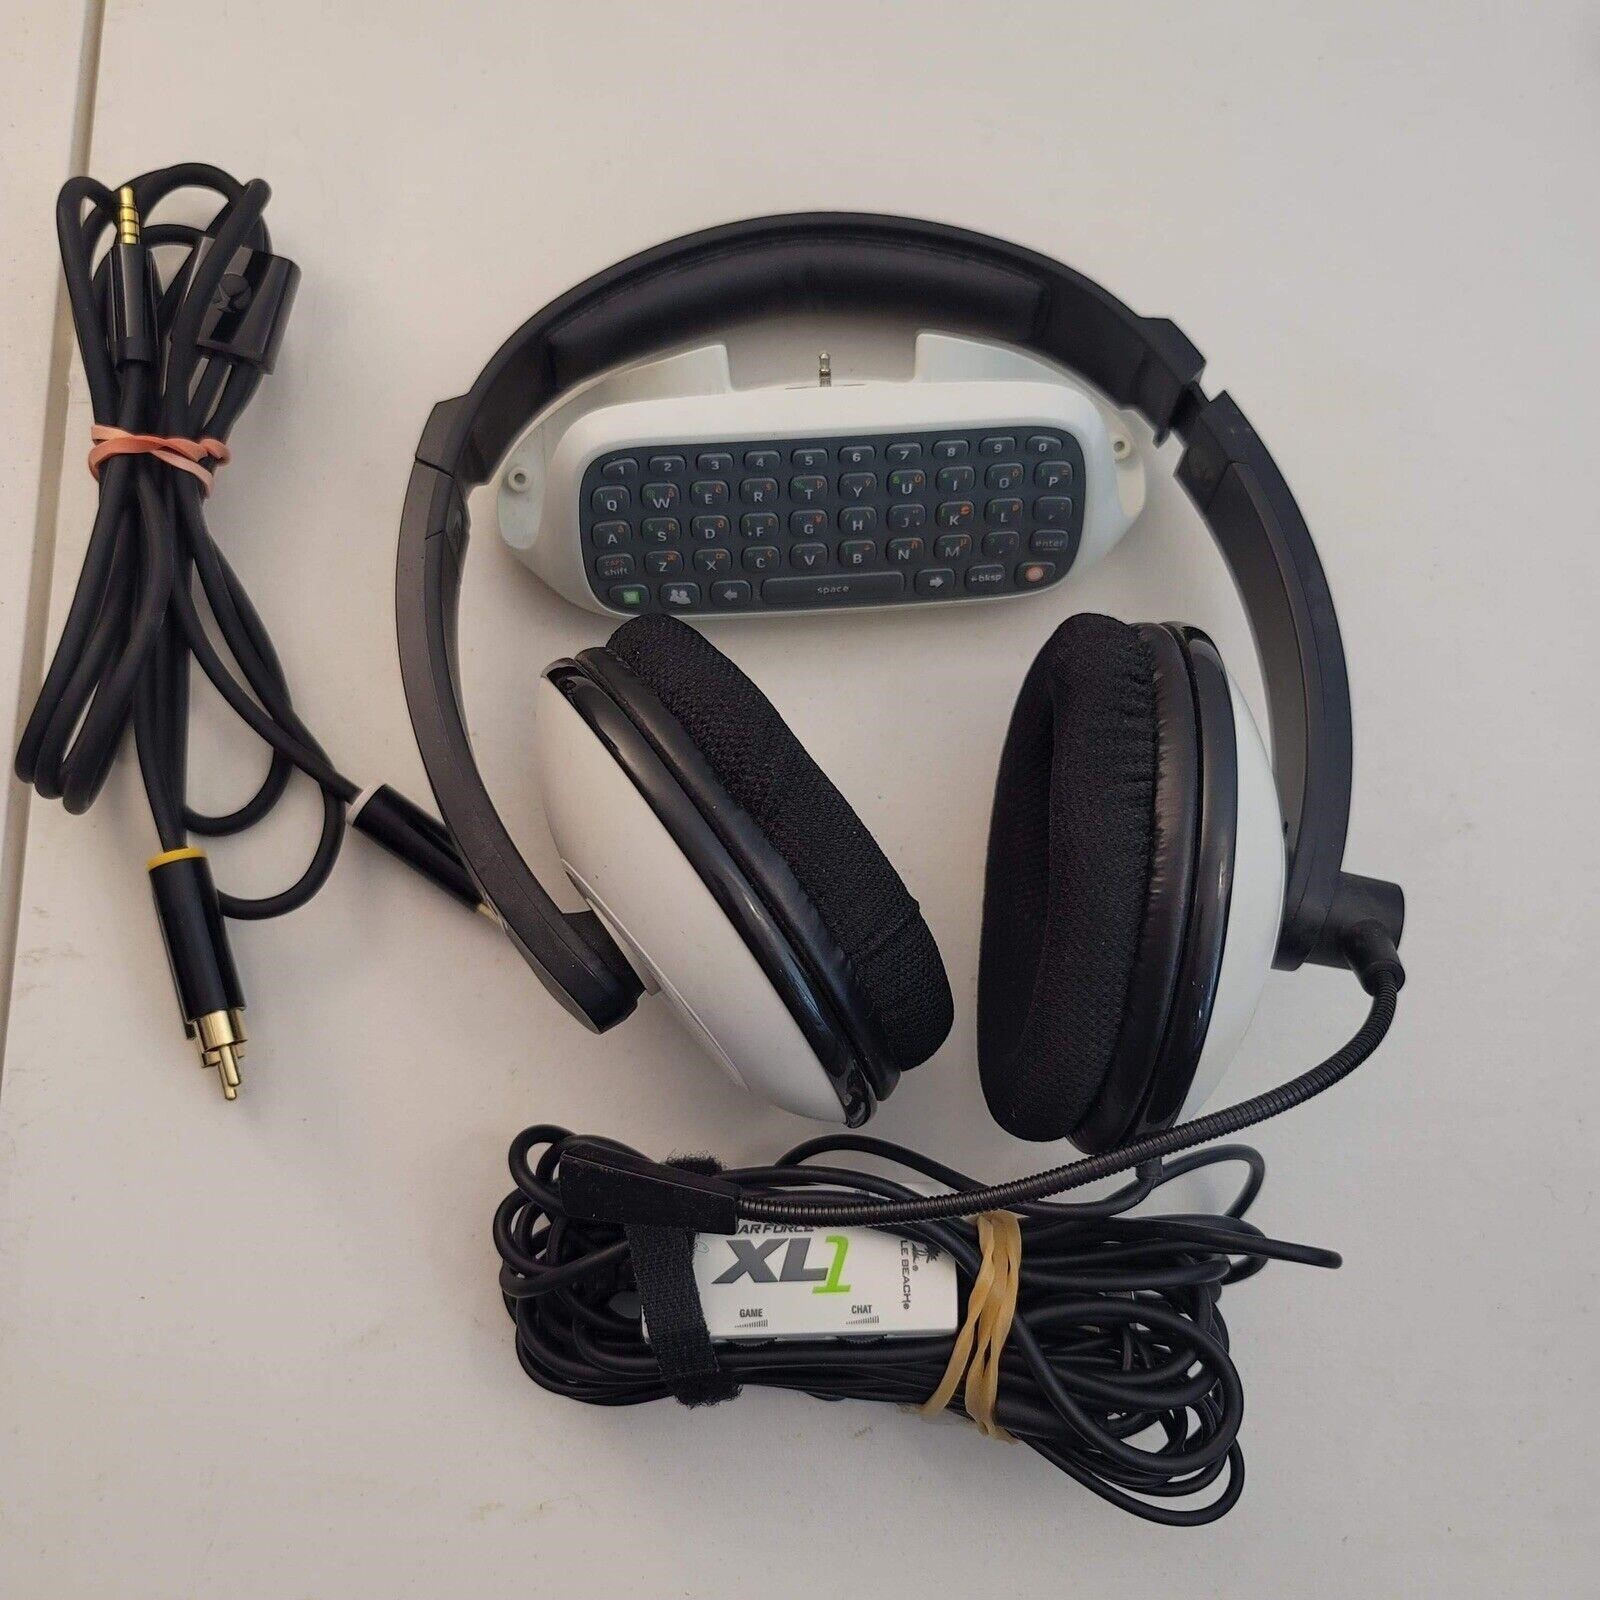 Xbox Live Ear Force XL1 Headset and Chatpad